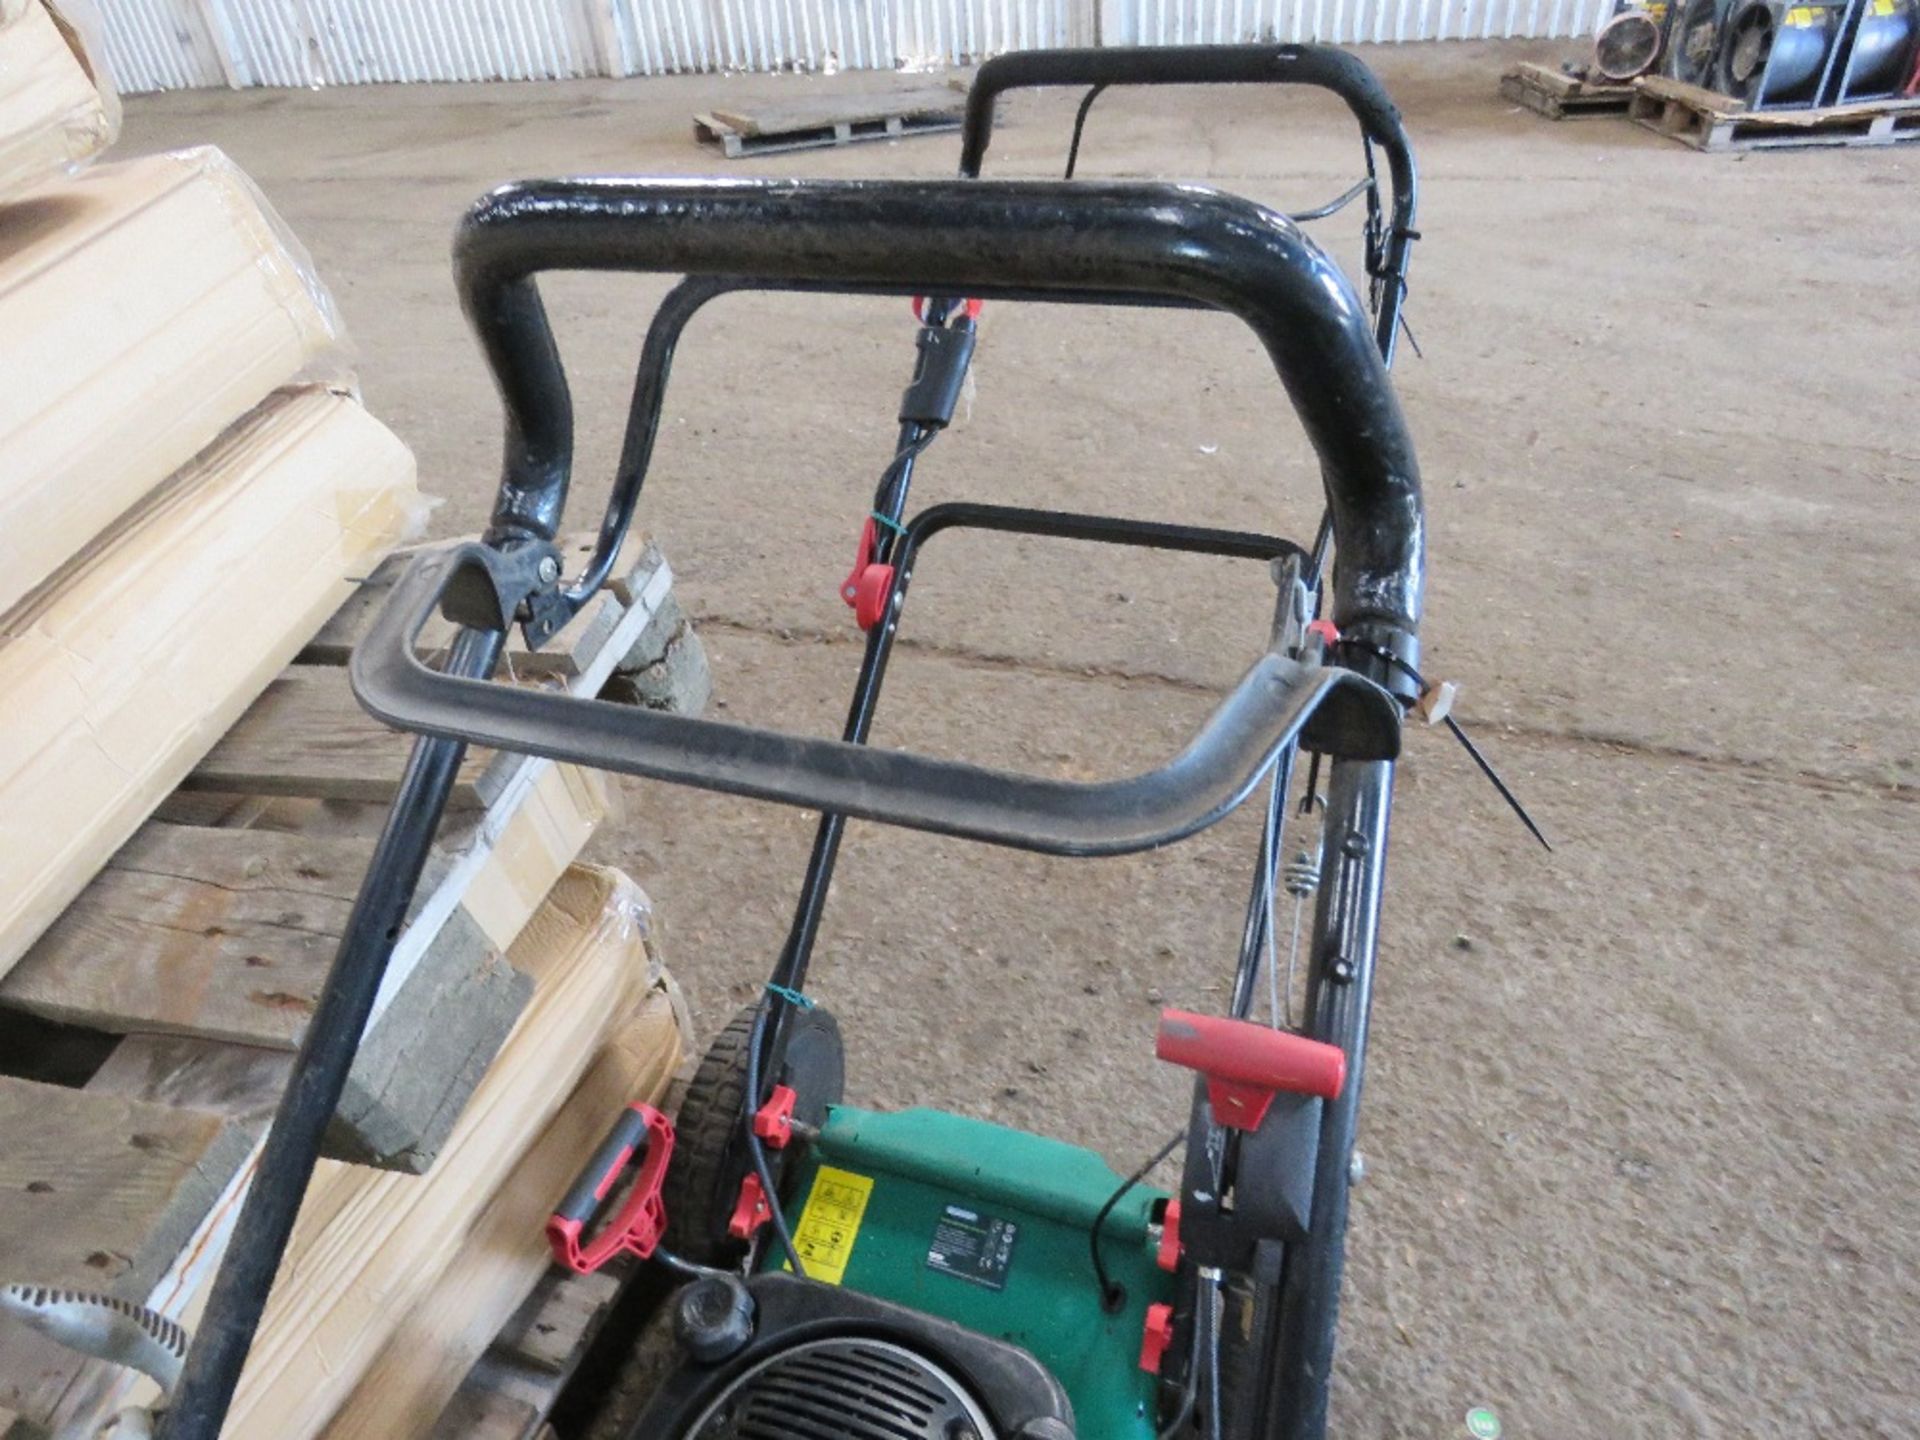 HAYTER HARRIER 48 ROLLER MOWER, NO COLLECTOR. UNTESTED, CONDITION UNKNOWN. NO VAT ON HAMMER PRICE - Image 2 of 4